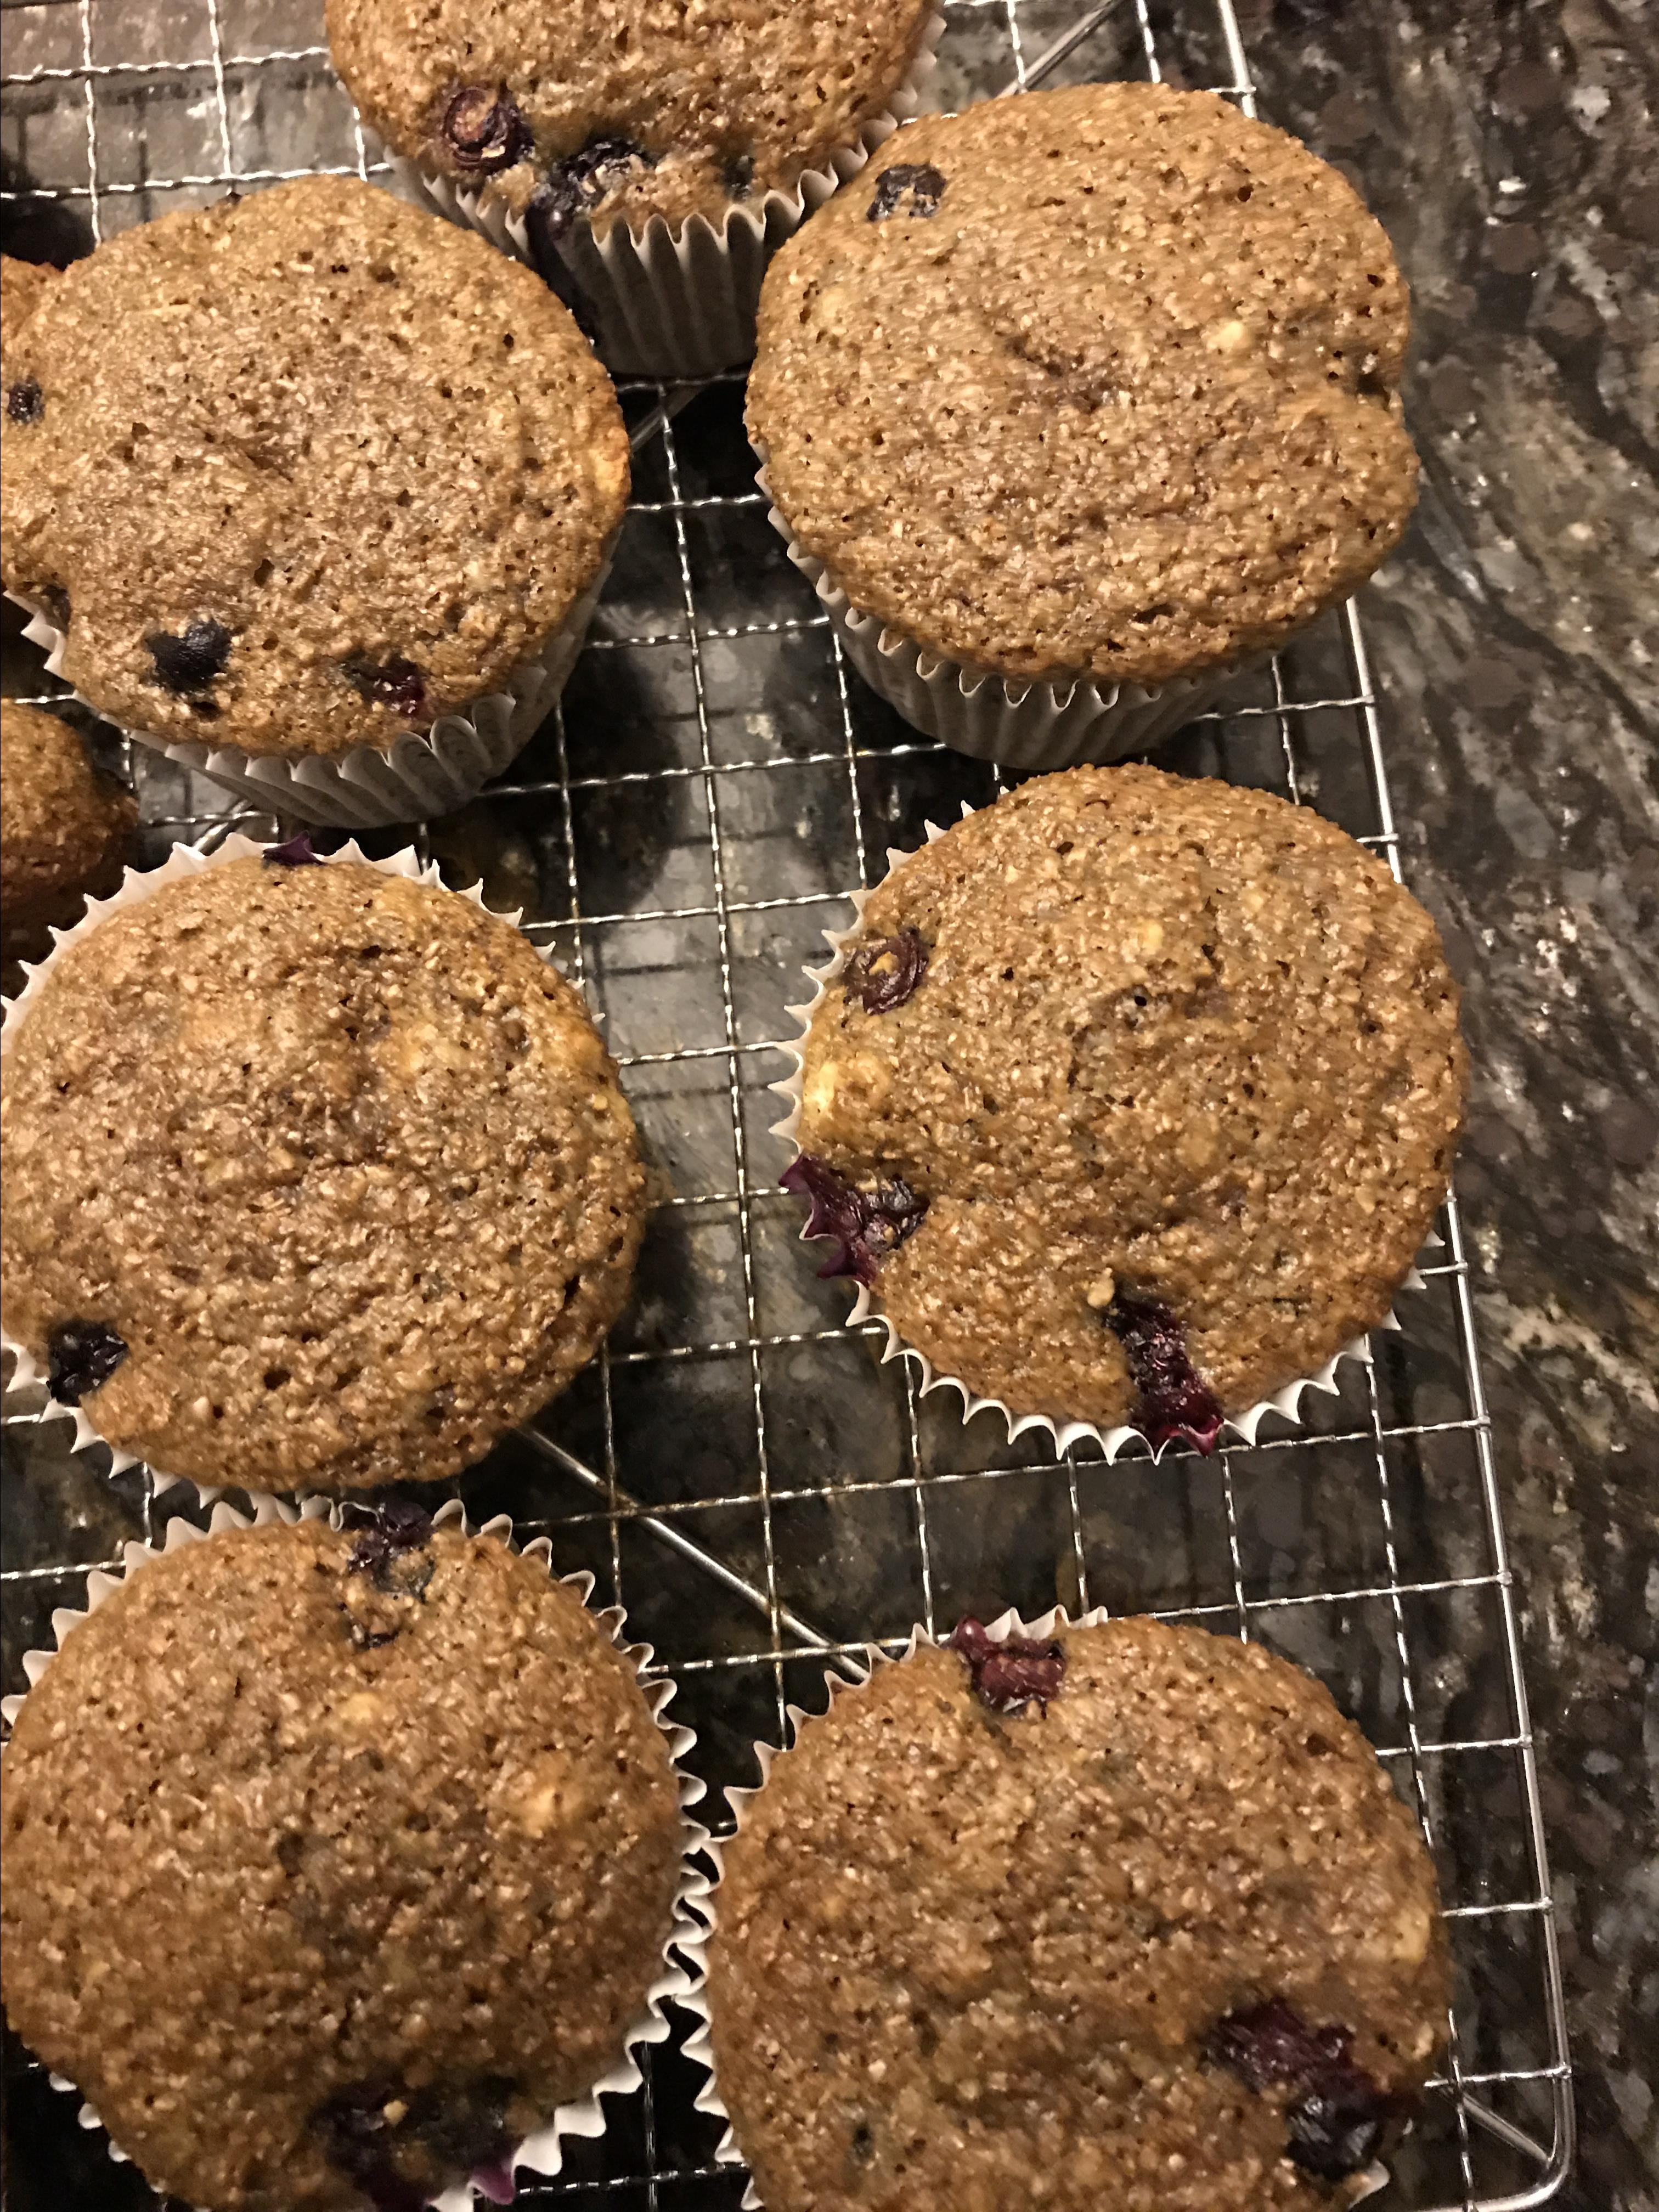 Low-Fat Blueberry Bran Muffins 